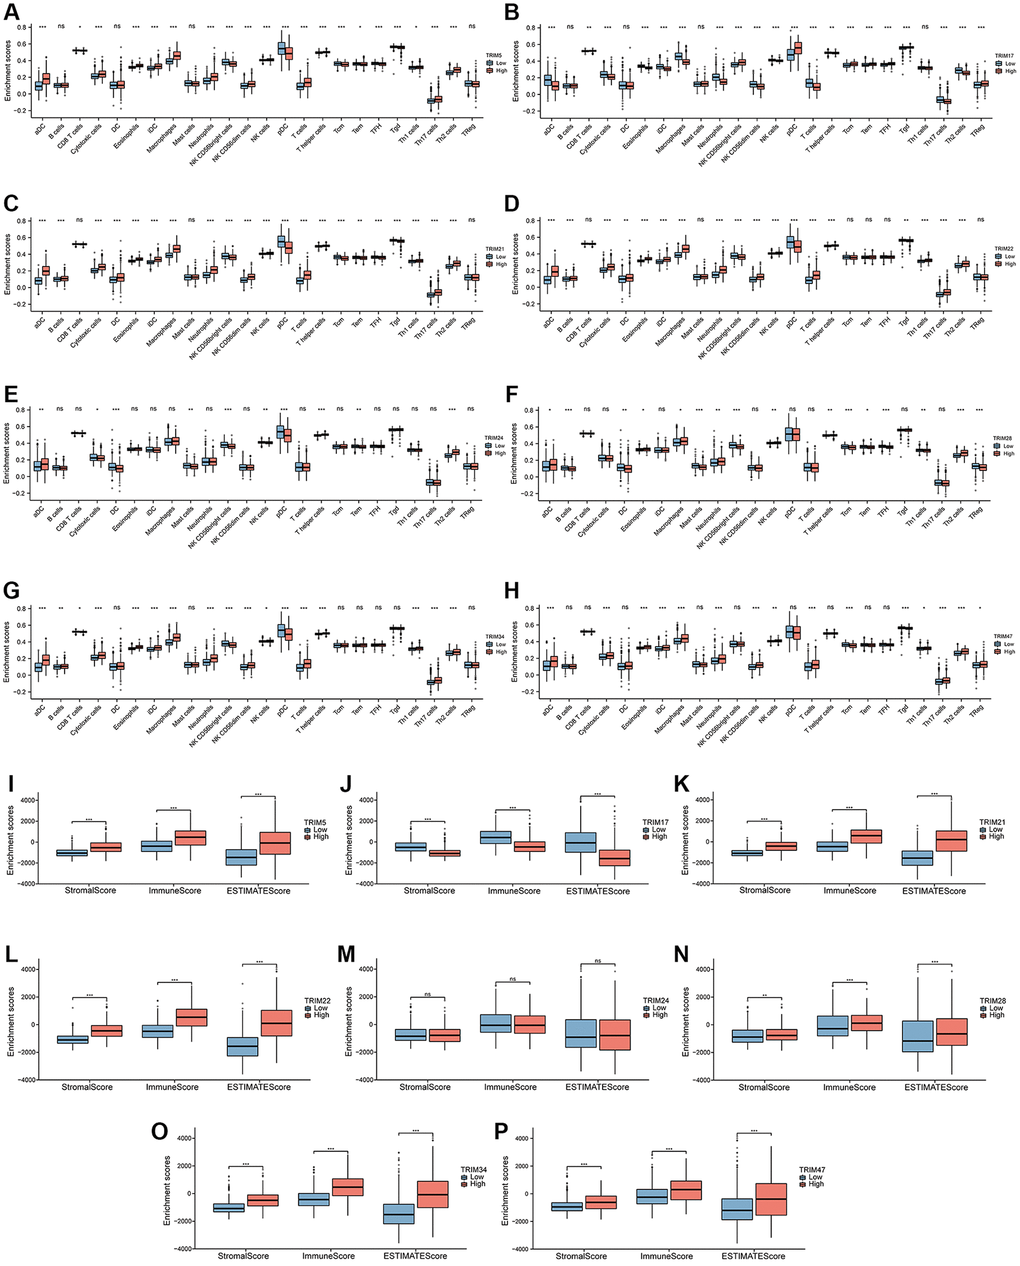 Immune infiltration landscapes of TRIM molecular family in gliomas. Correlation between TRIM family members' expression and 24 tumor-infiltrating immune cell types (A–H). Distribution of stromal score, immune score and ESTIMATE score in high- versus low-TRIM family expression groups (I–P). ns, p ≥ 0.05; *p **p ***p 